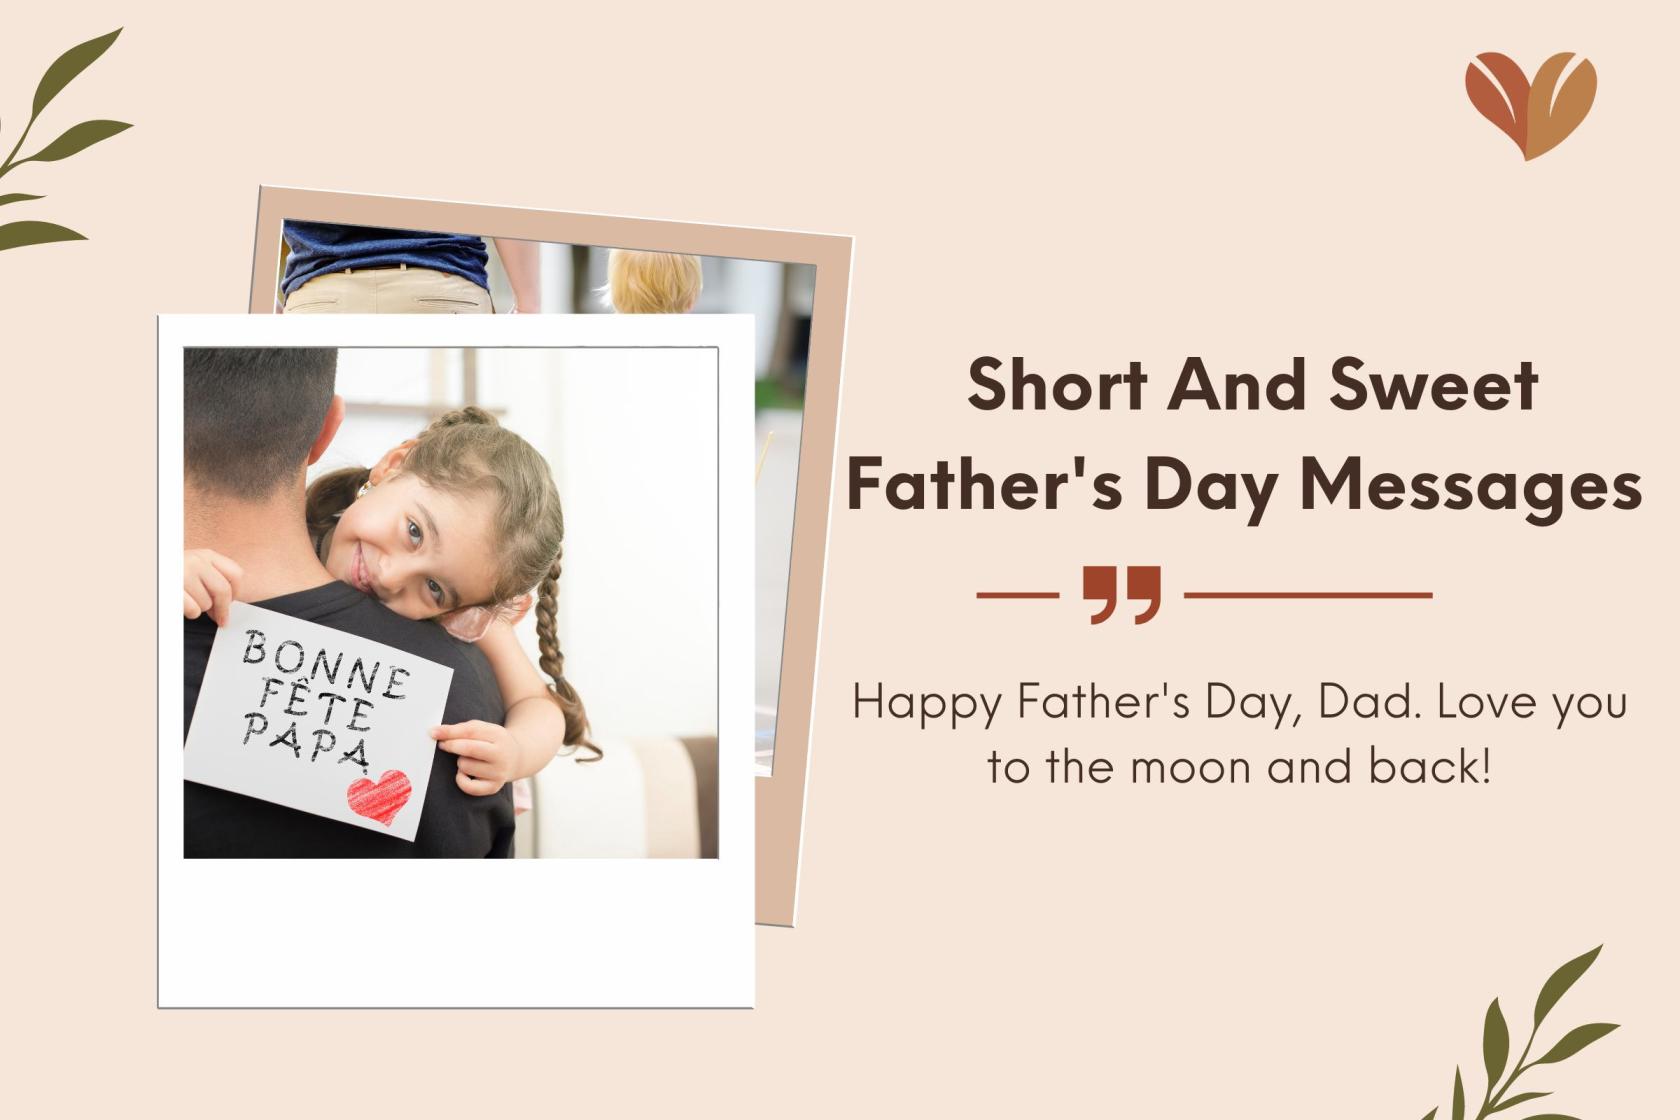 Short And Sweet Father's Day Messages